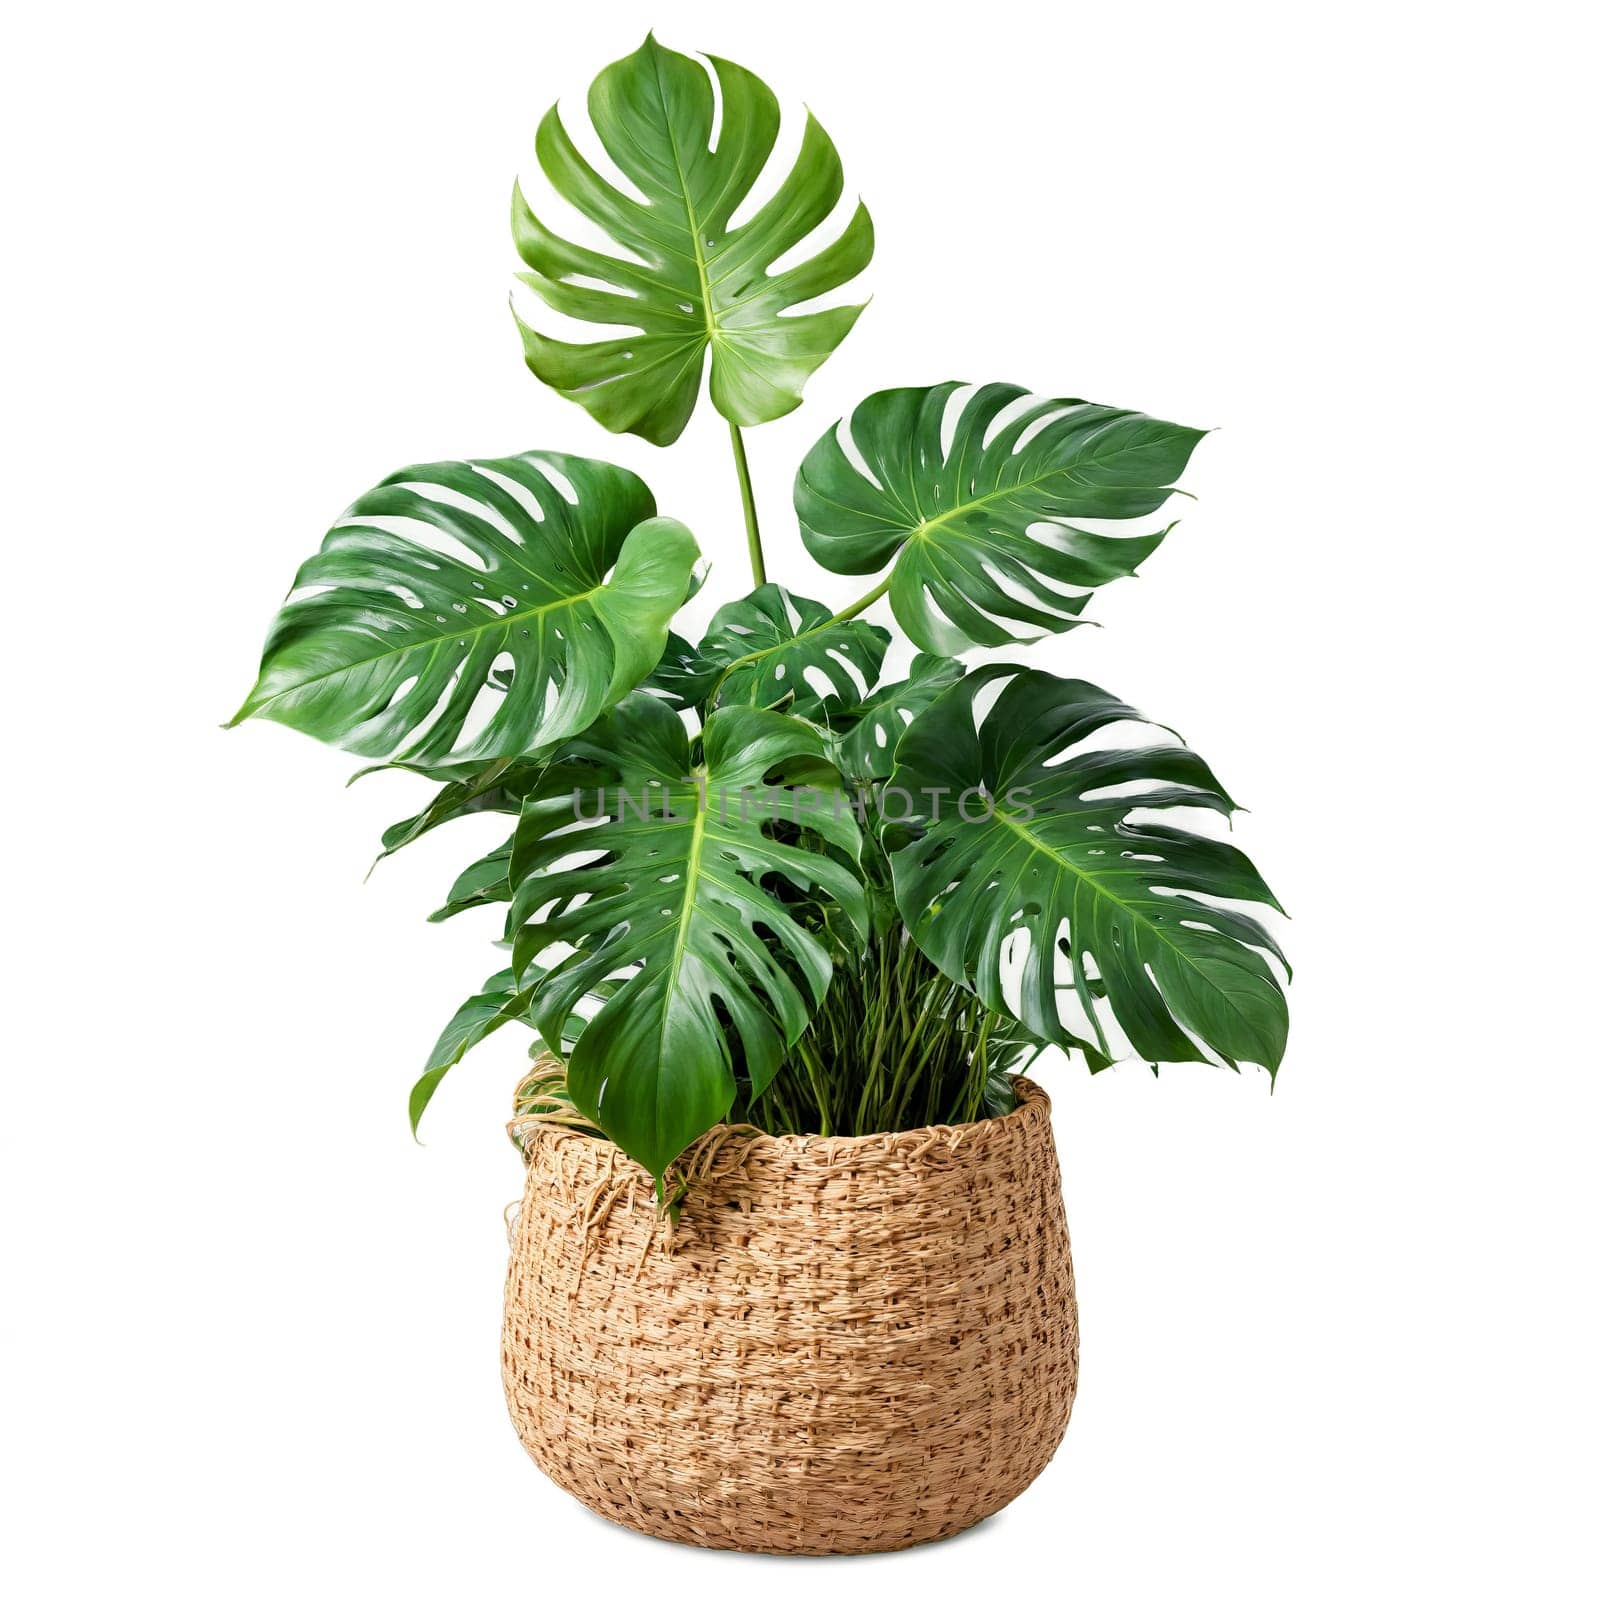 Swiss Cheese Plant large green leaves with oval holes in a woven basket planter with. Plants isolated on transparent background.